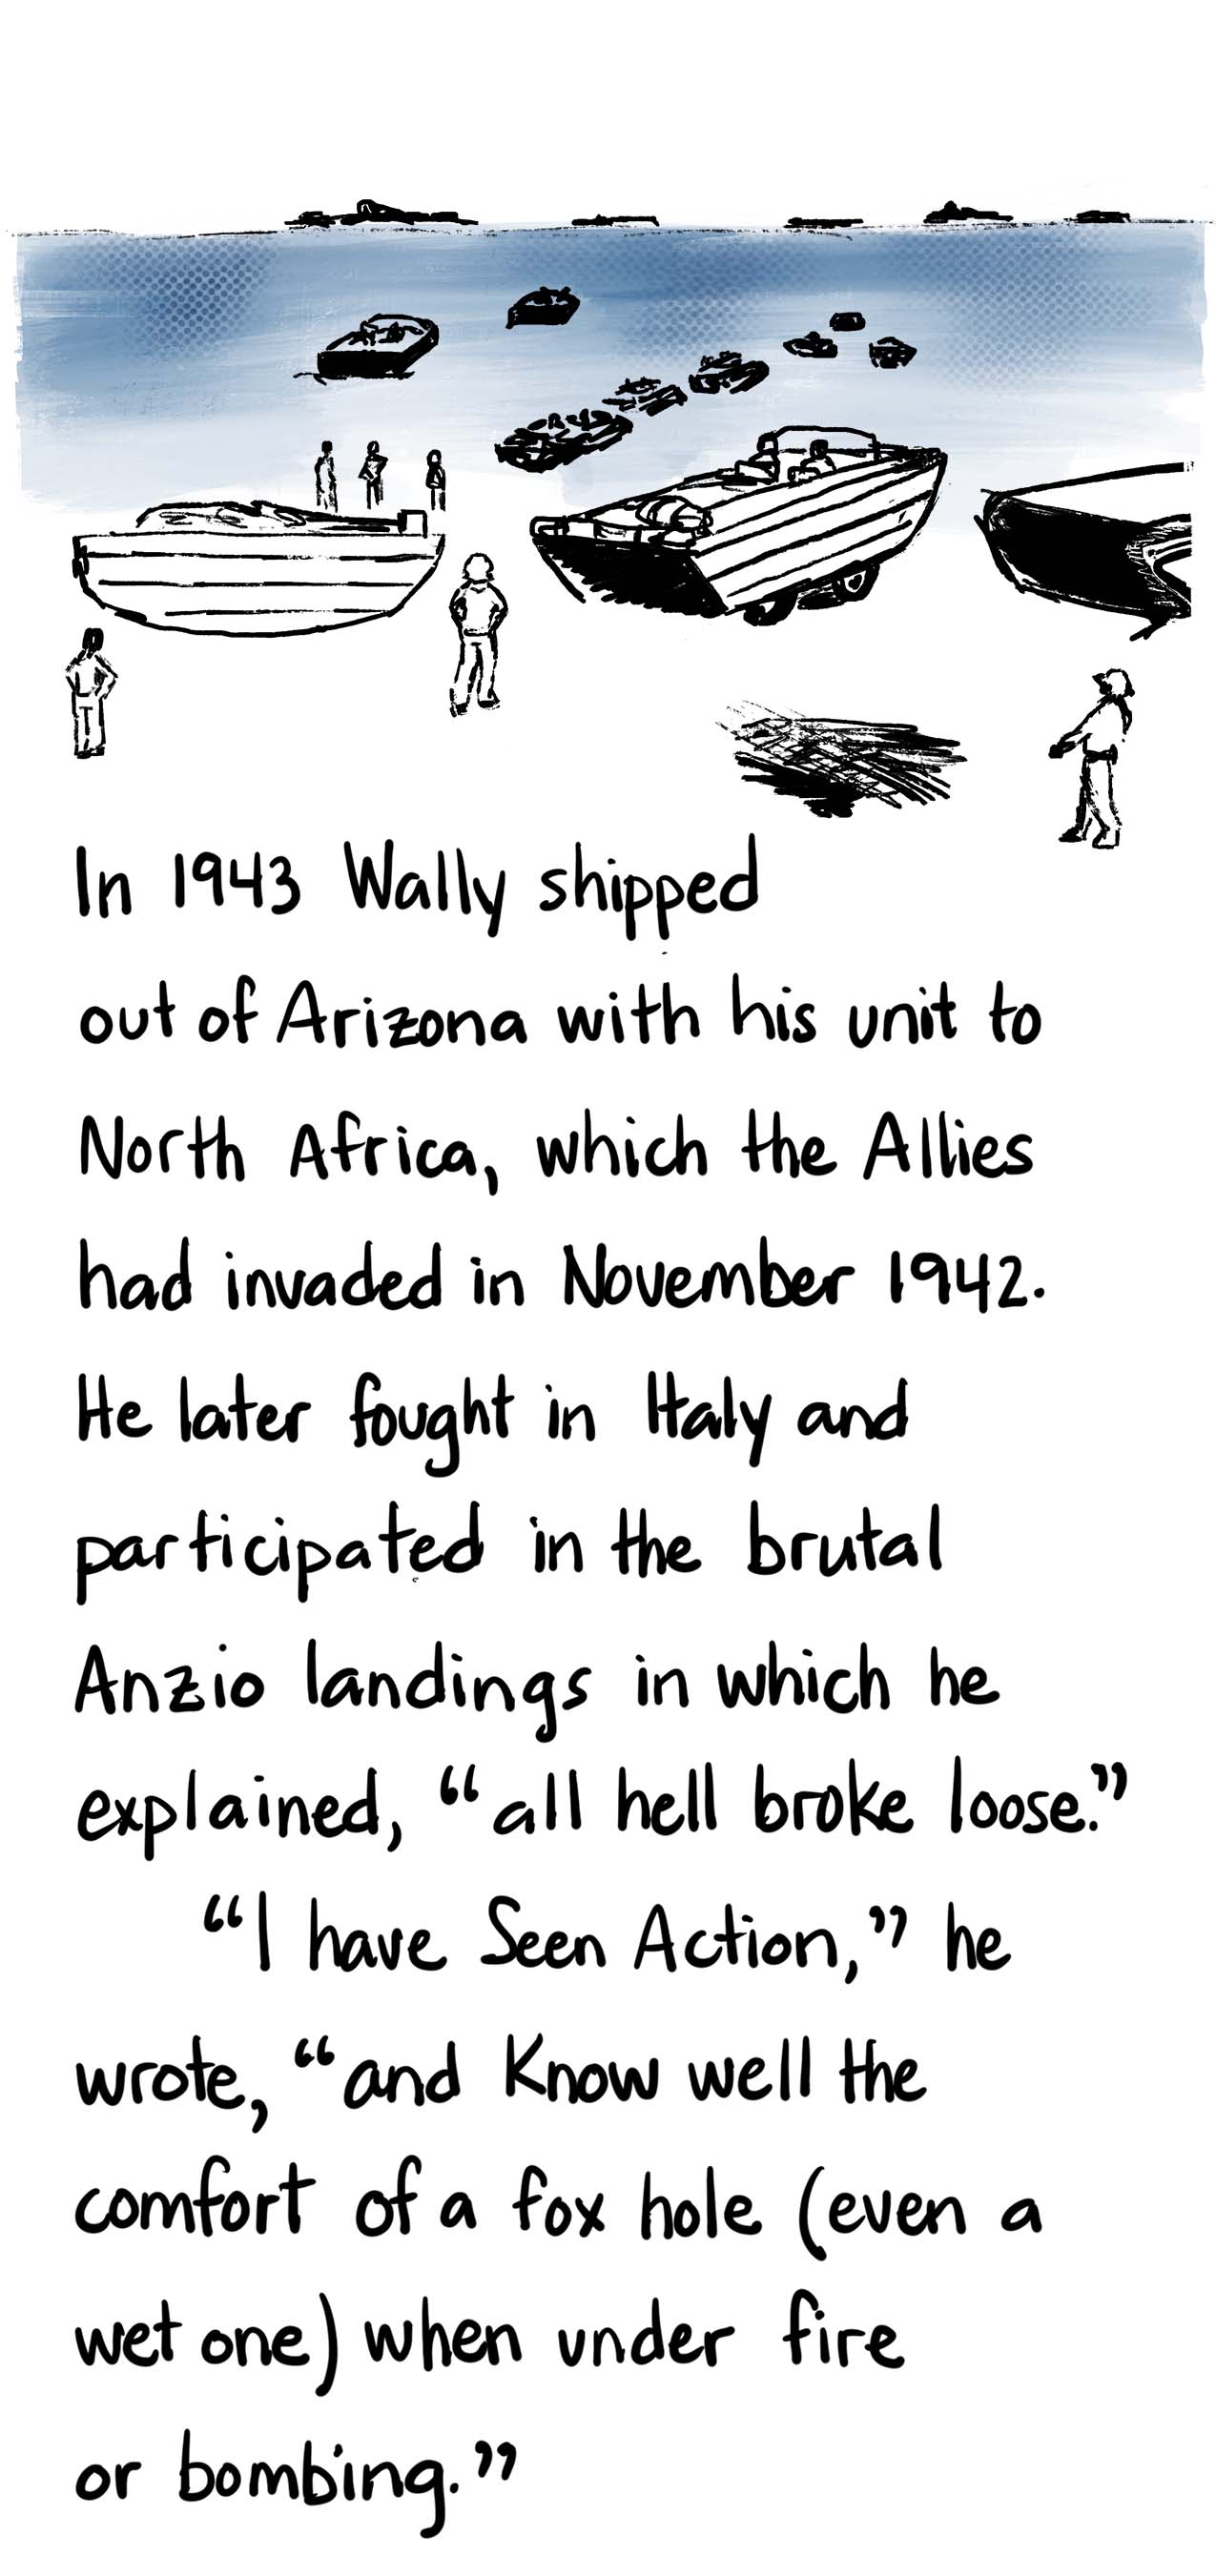 Image: Anzio landing, ducks. Text: In 1943 Wally shipped out of Arizona with his unit to North Africa, which the Allies had invaded in November 1942. He later fought in Italy and participated in the brutal Anzio landings in which he explained, “all hell broke loose.” “I have Seen Action," he wrote, “and Know well the comfort of a fox hole (even a wet one) when under fire or bombing.”